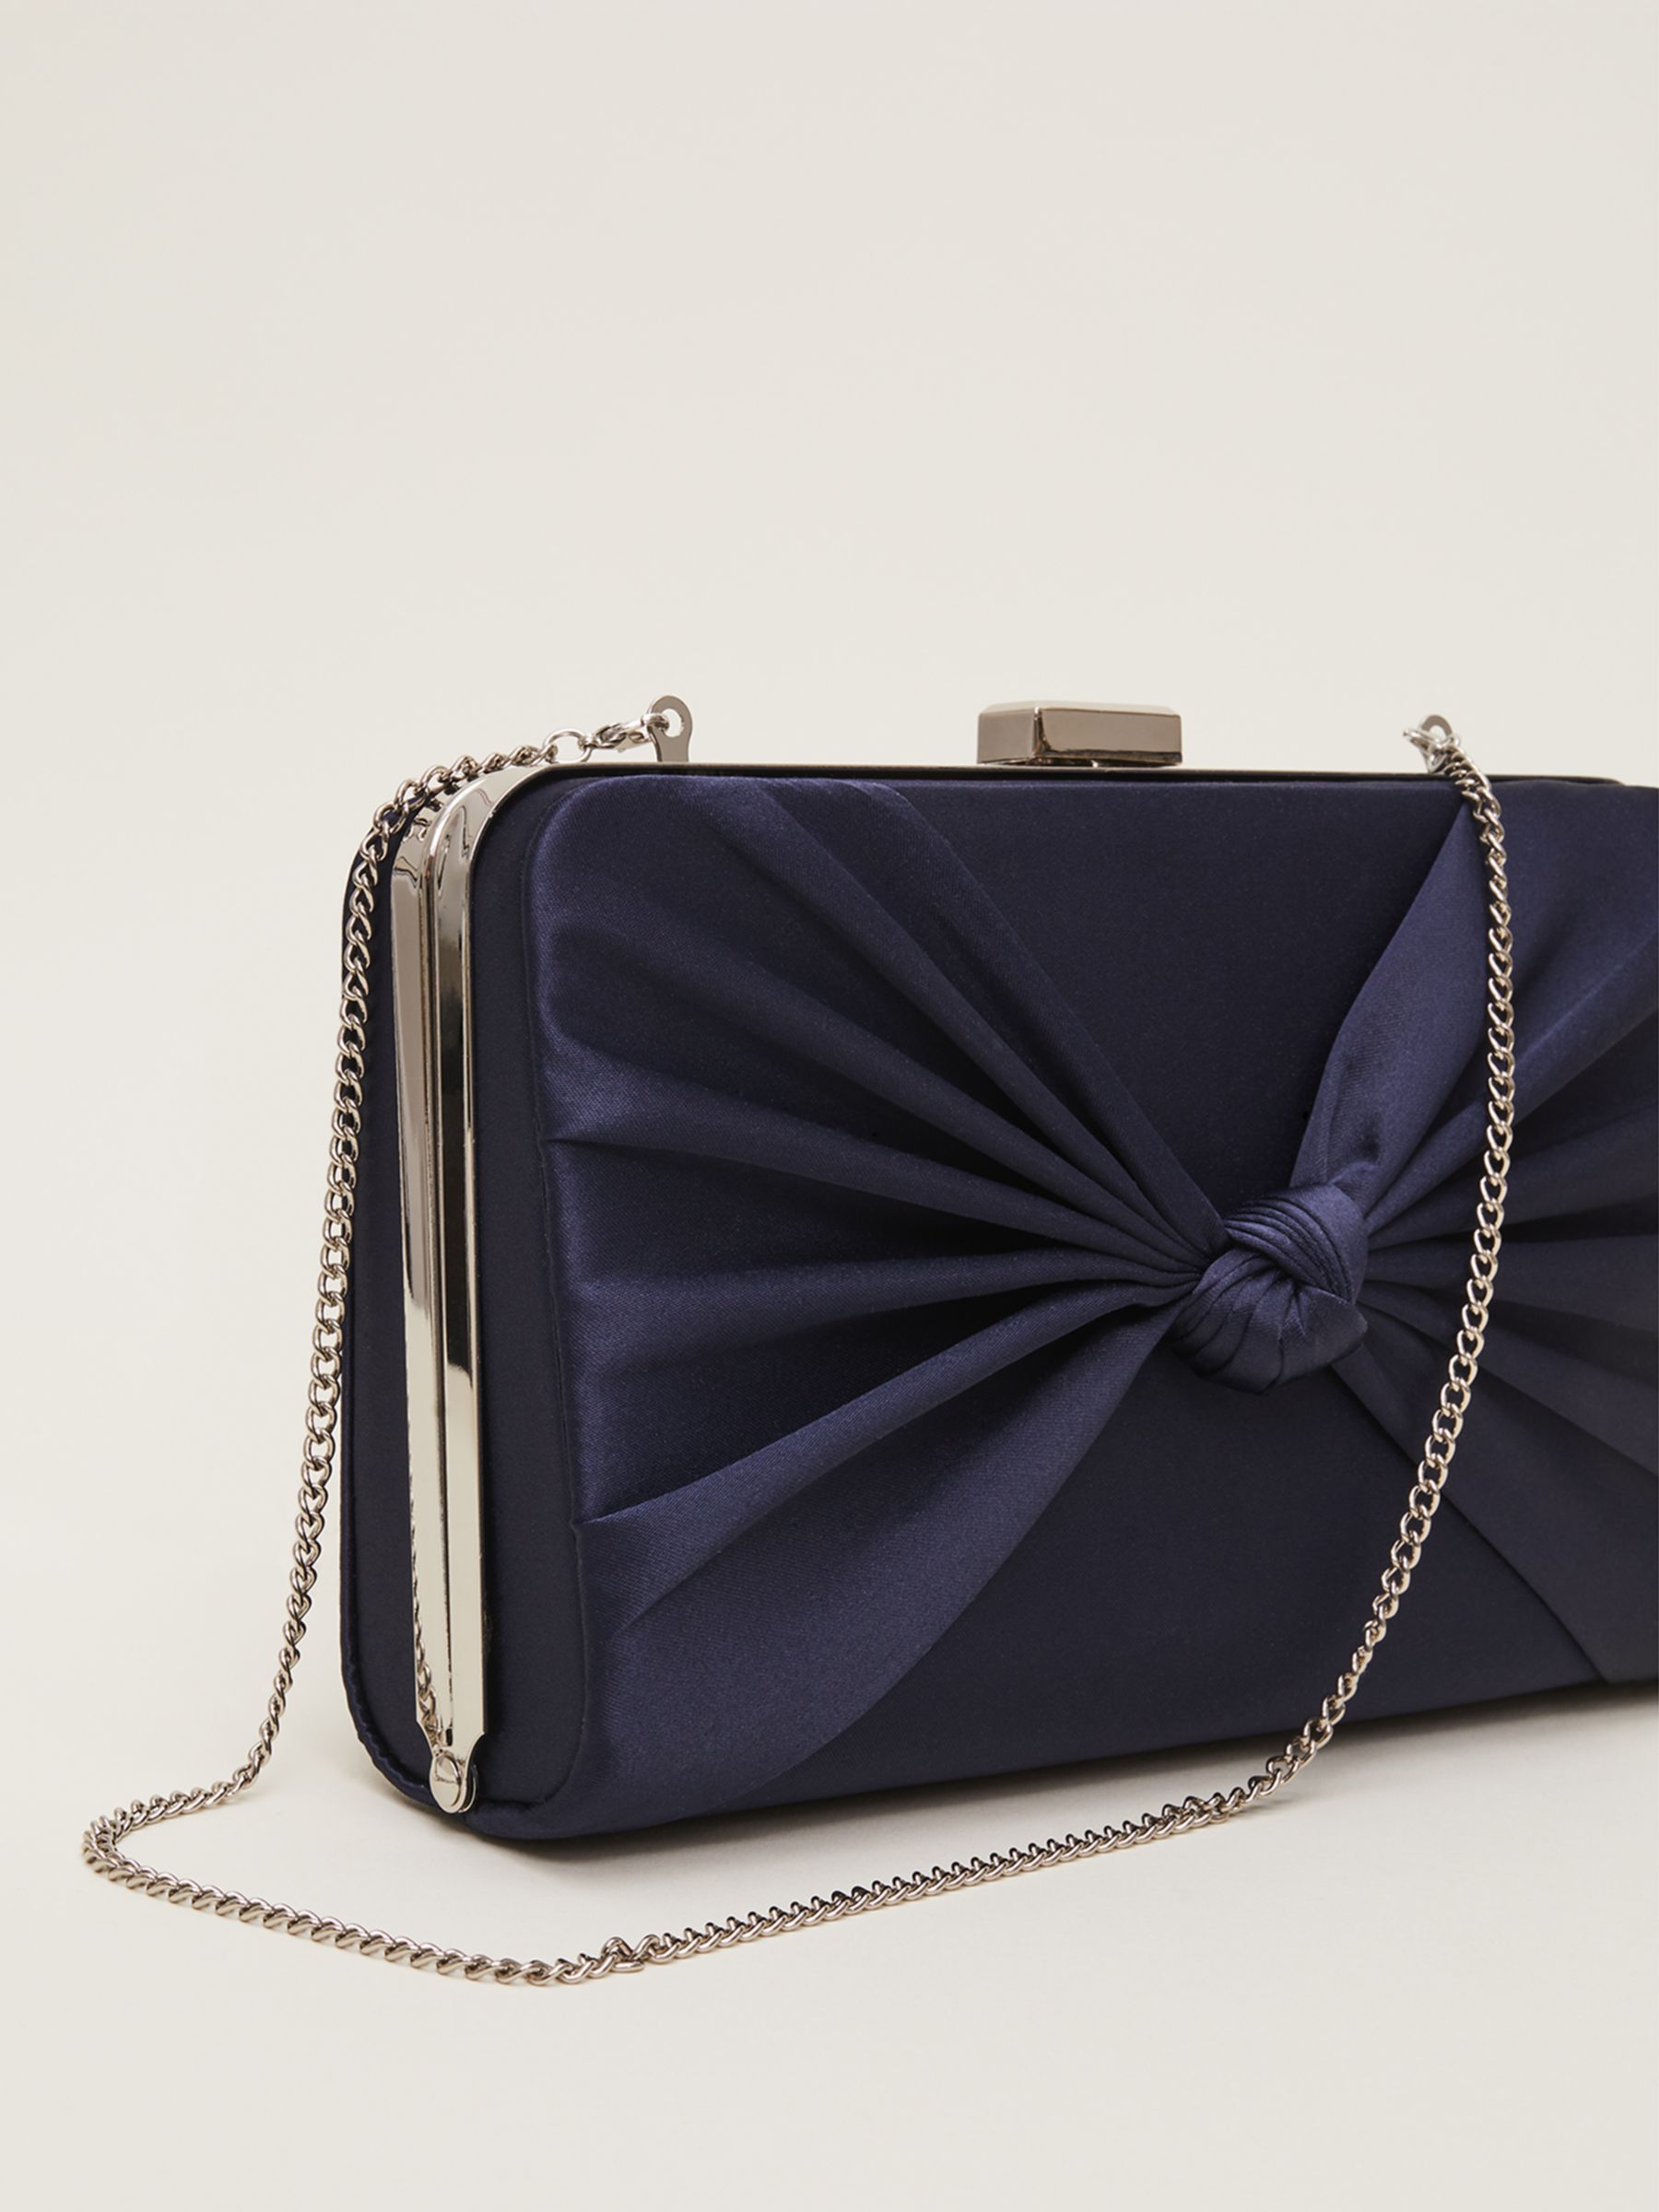 Phase Eight Satin Knot Front Box Clutch Bag, Navy, One Size